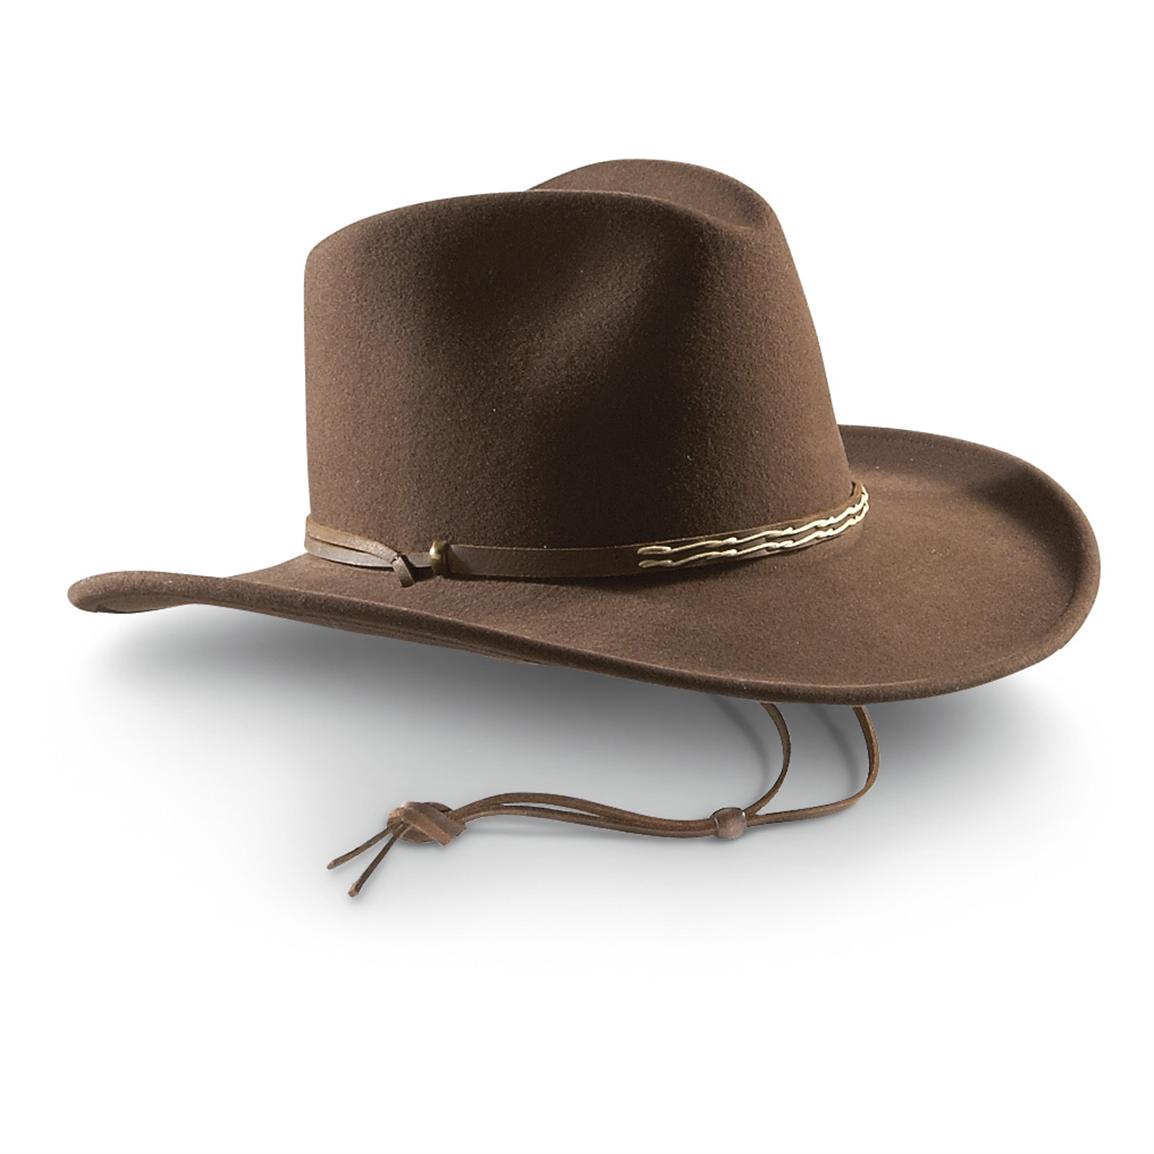 Bailey® Orbell Lite Felt Cowboy Hat Brown 421675 Hats And Caps At